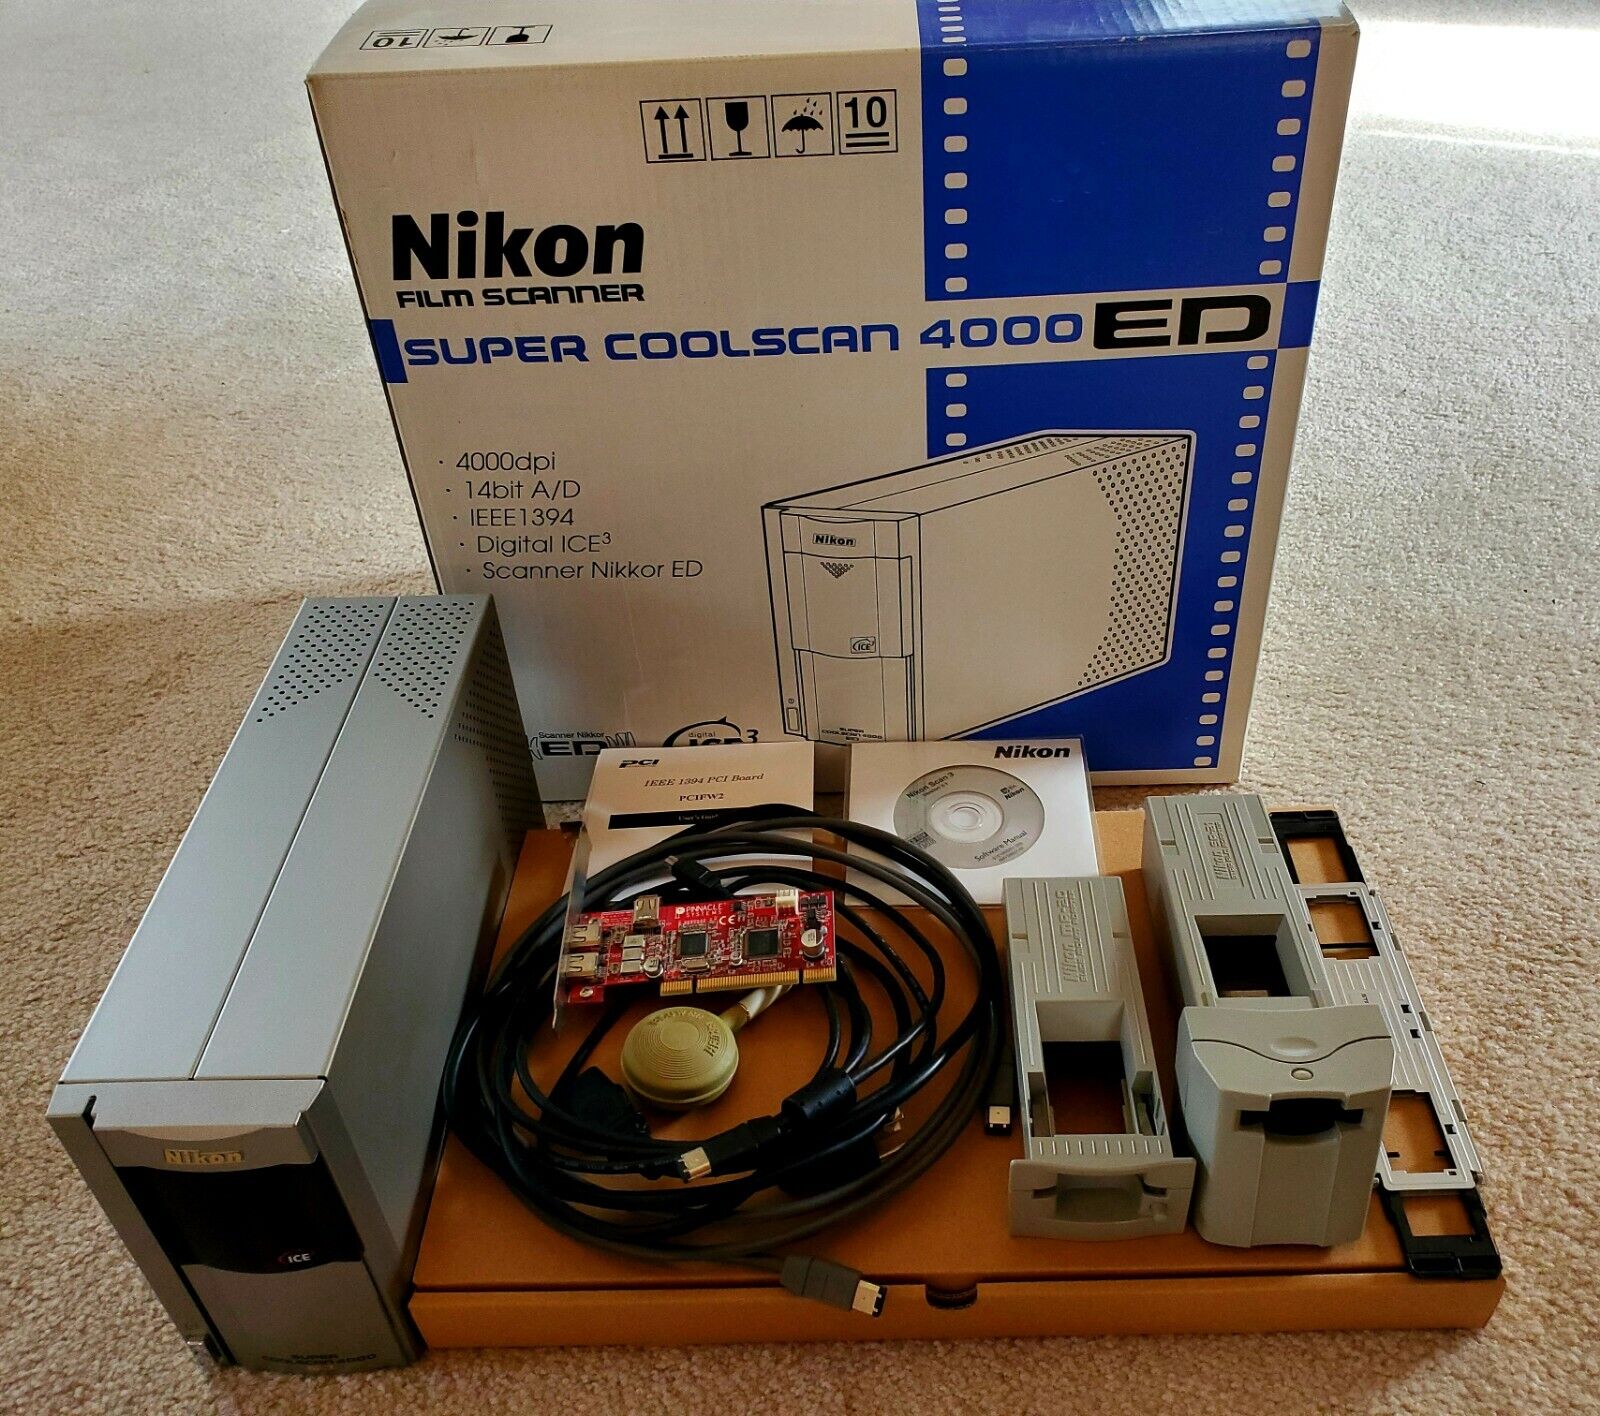 MINT Nikon Coolscan 4000 scanner with all accessories and upgraded IEEE1394 card